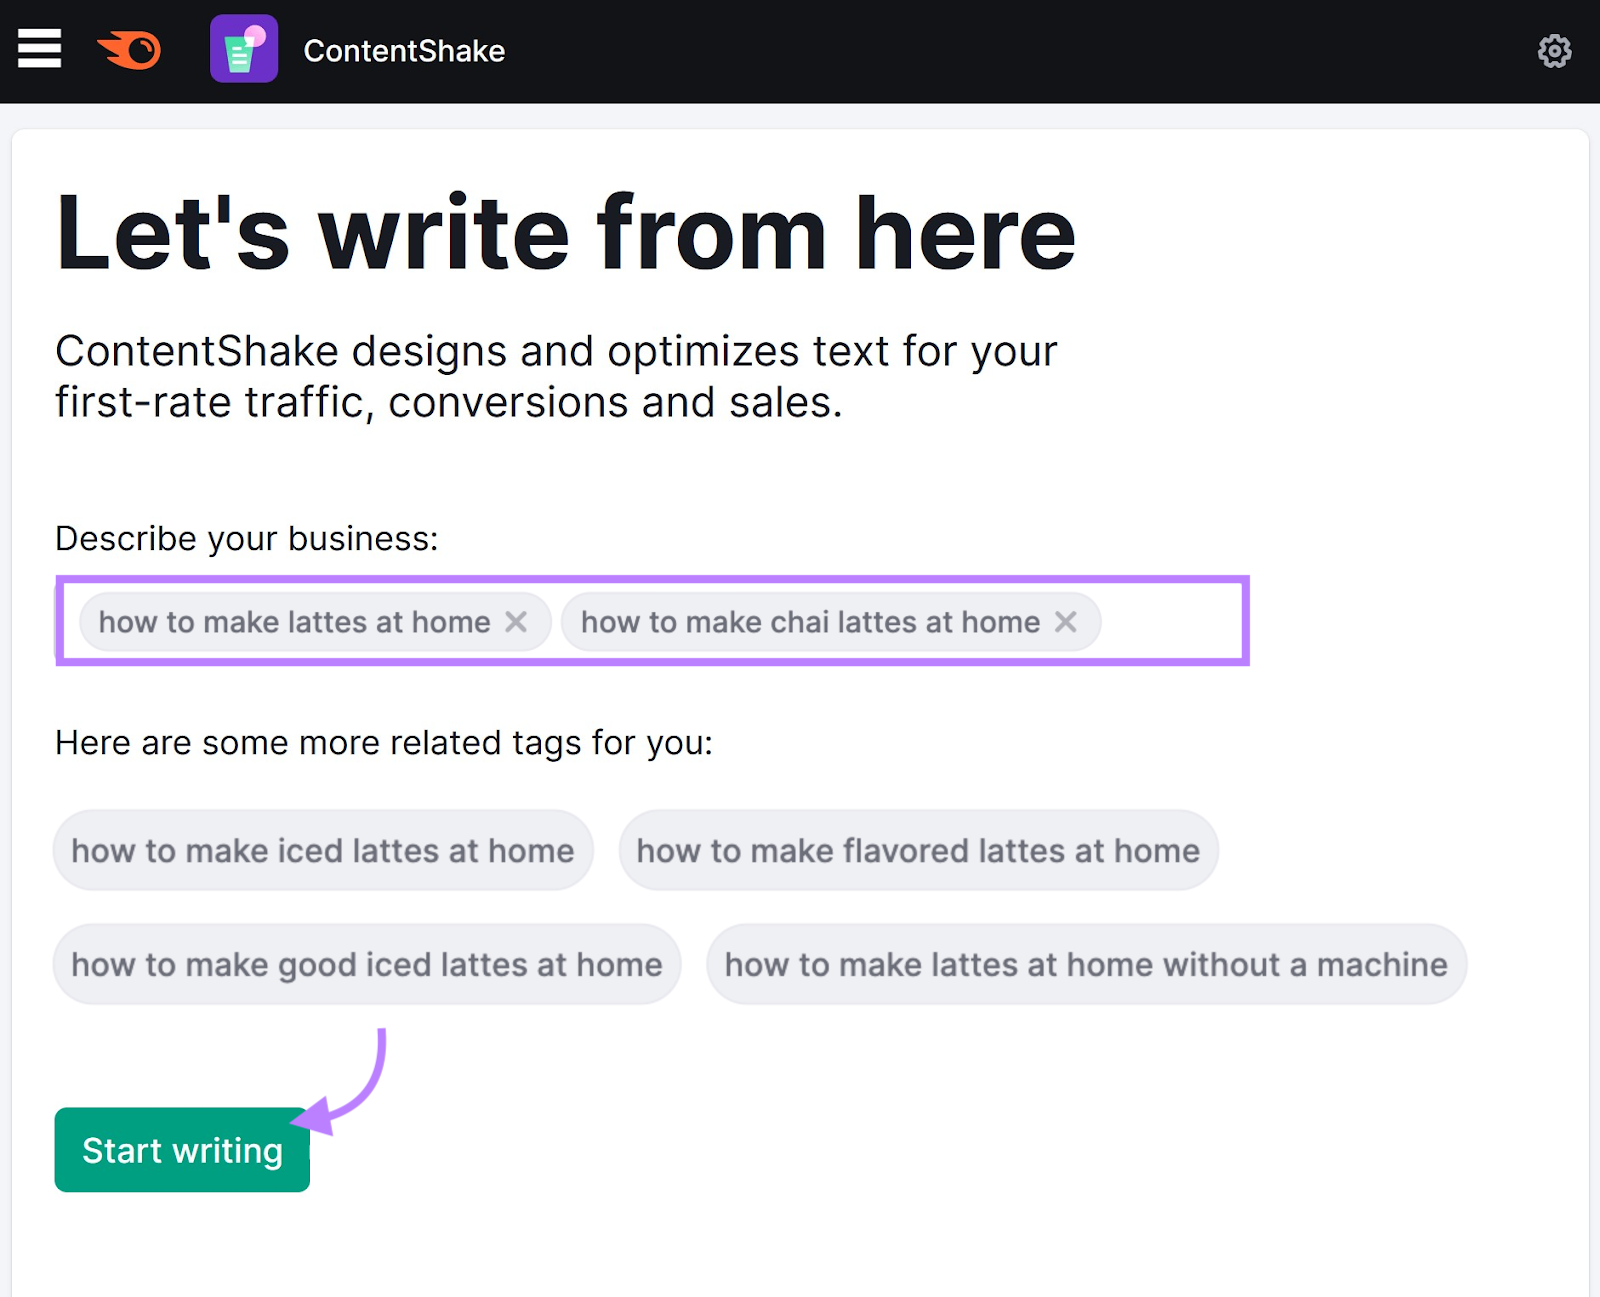 "Let's write from here" section in ContentShake AI